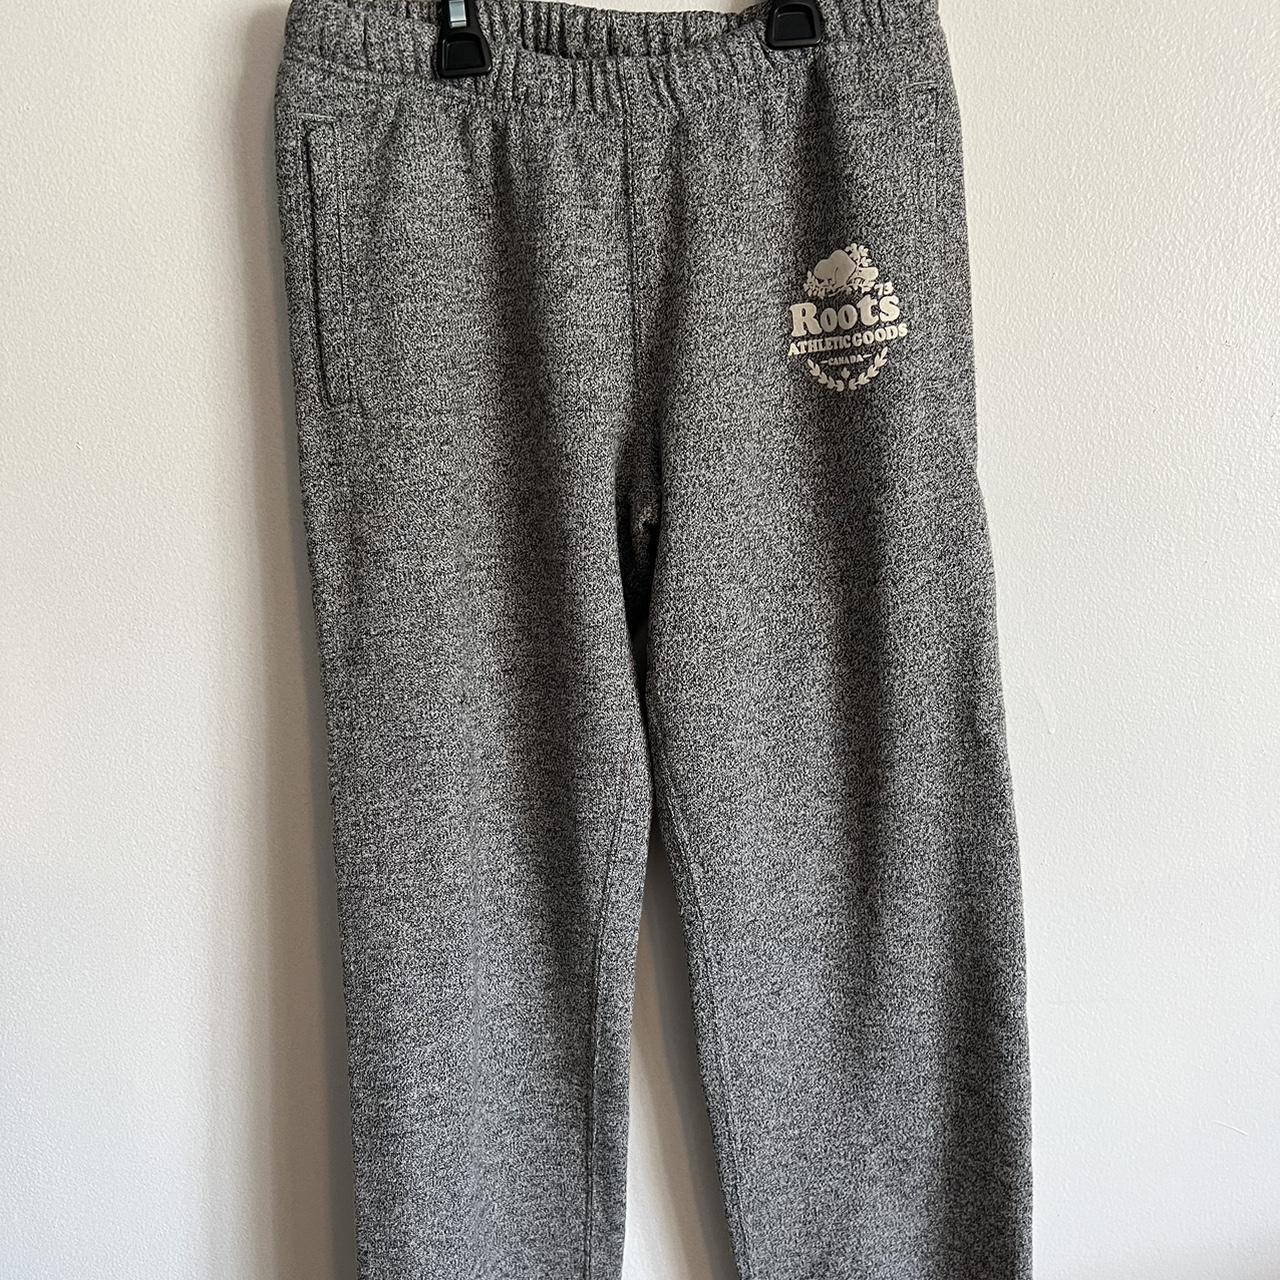 Roots Women's Grey and Black Joggers-tracksuits | Depop